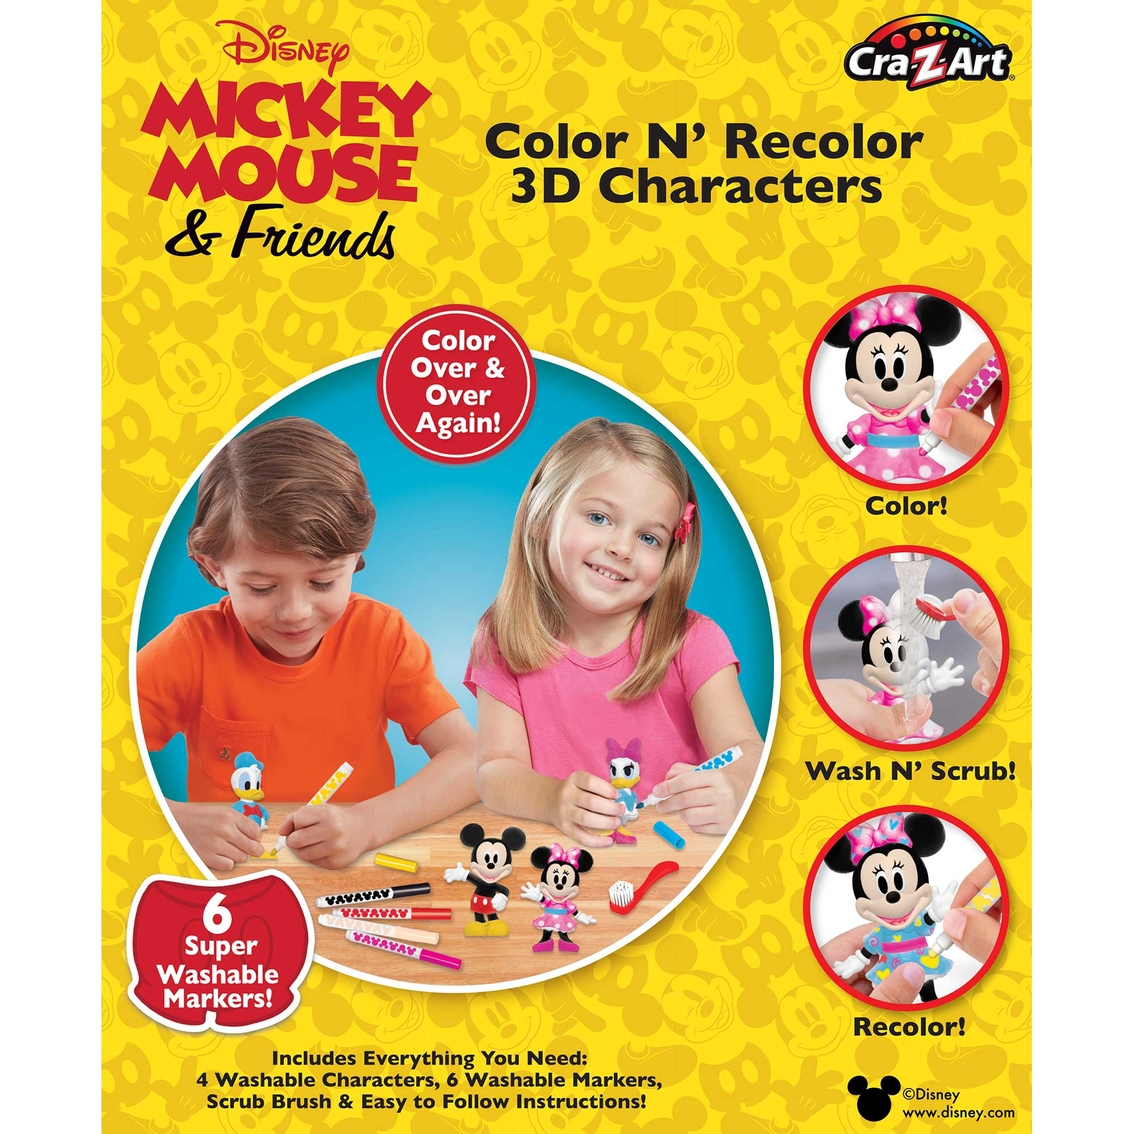 Cra-Z-Art Disney Mickey Mouse and Friends Color N' Recolor 3D Characters Set - Image 2 of 9